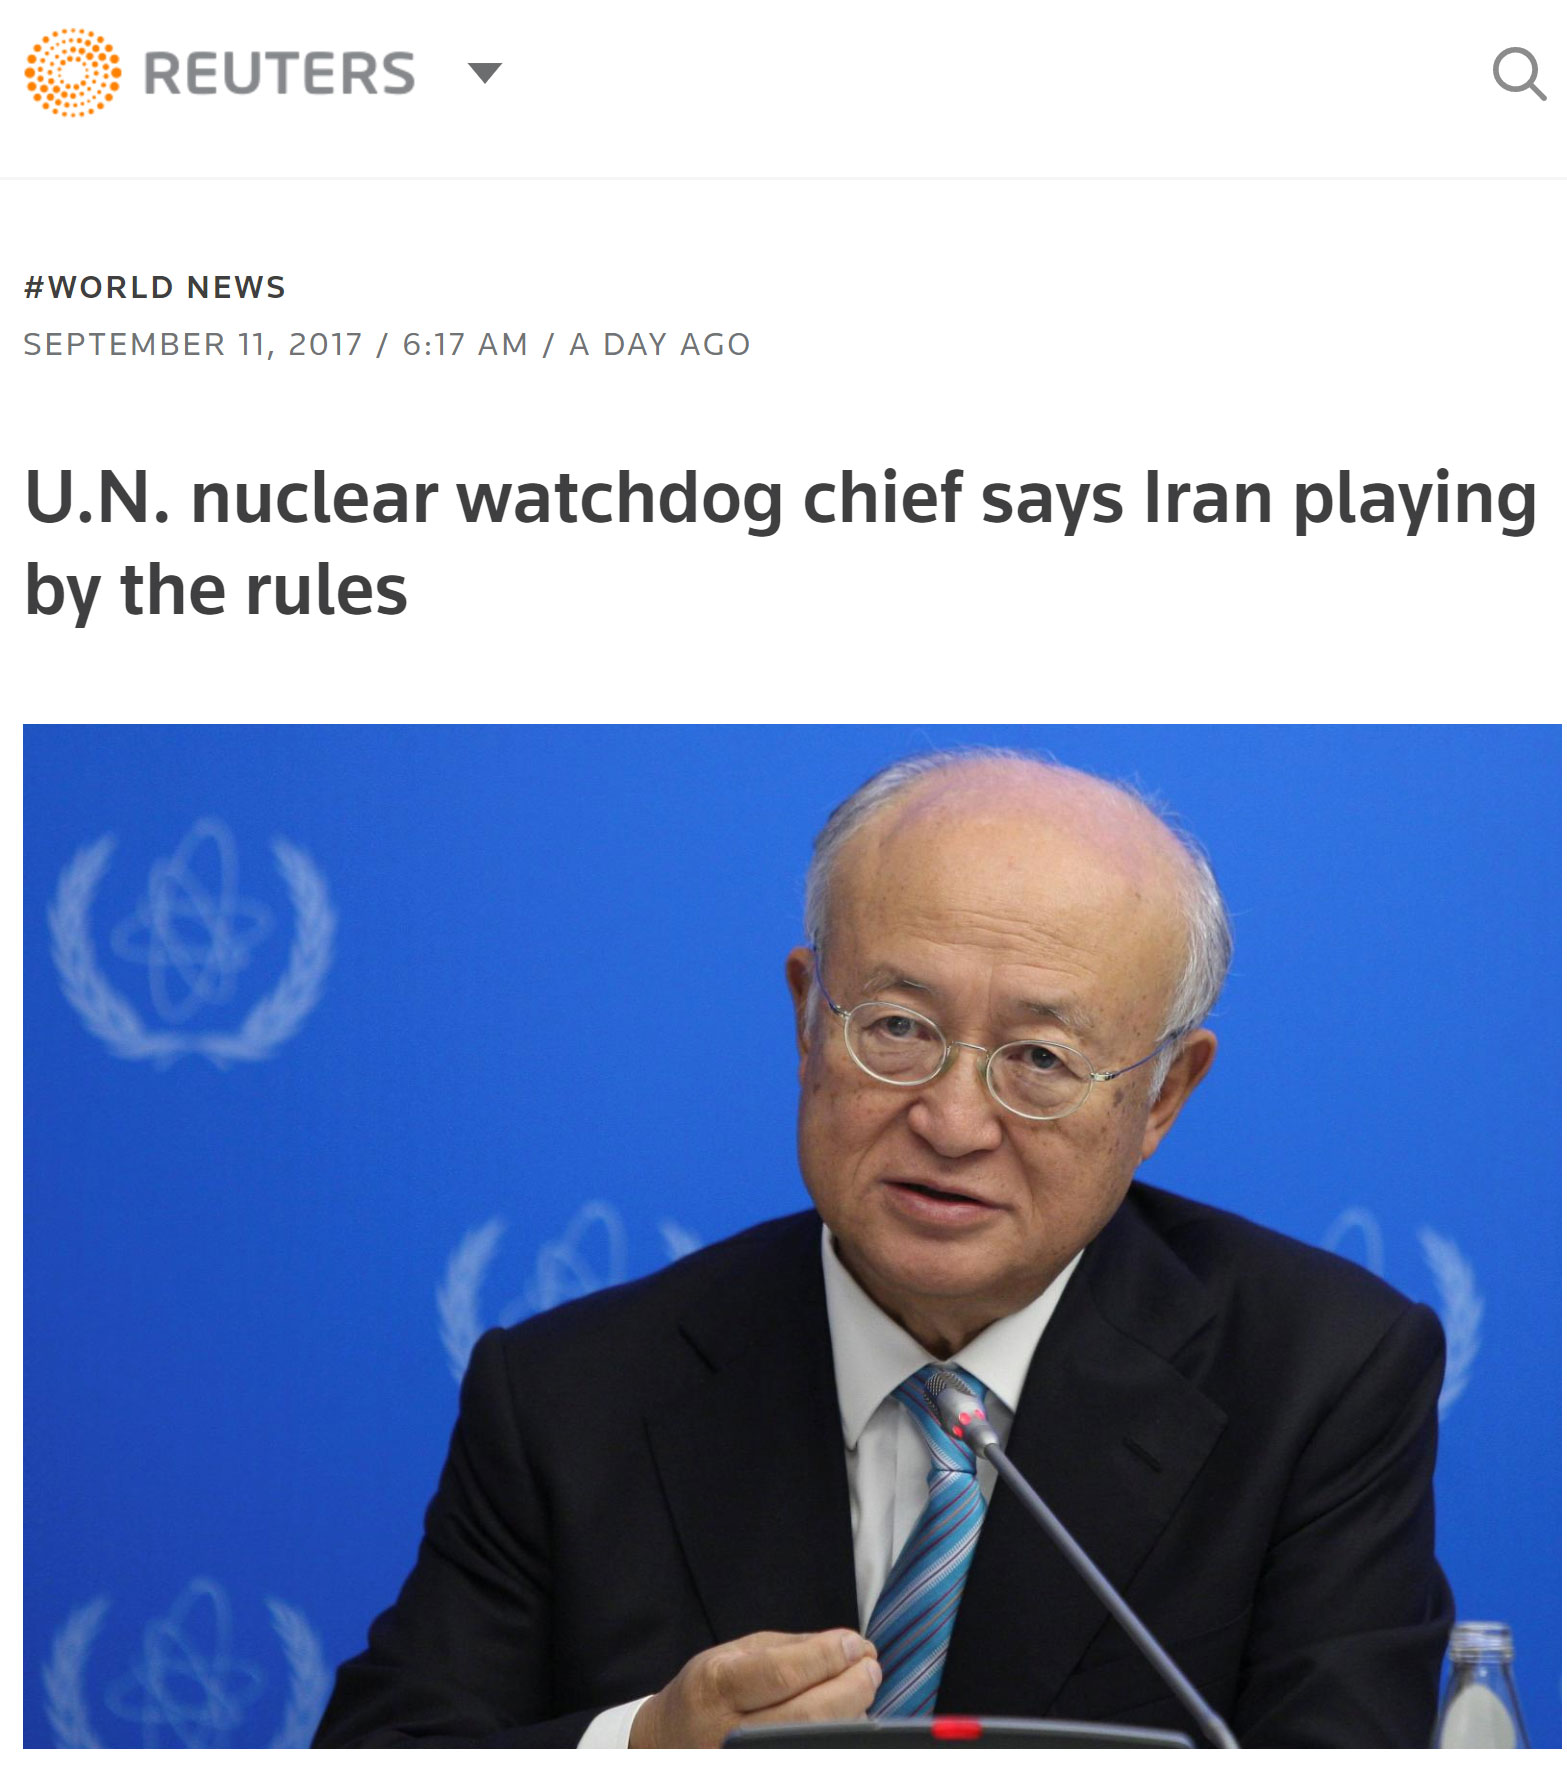 23-nuclear-watchdog-chief-says-Iran-playing-by-the-rules.jpg